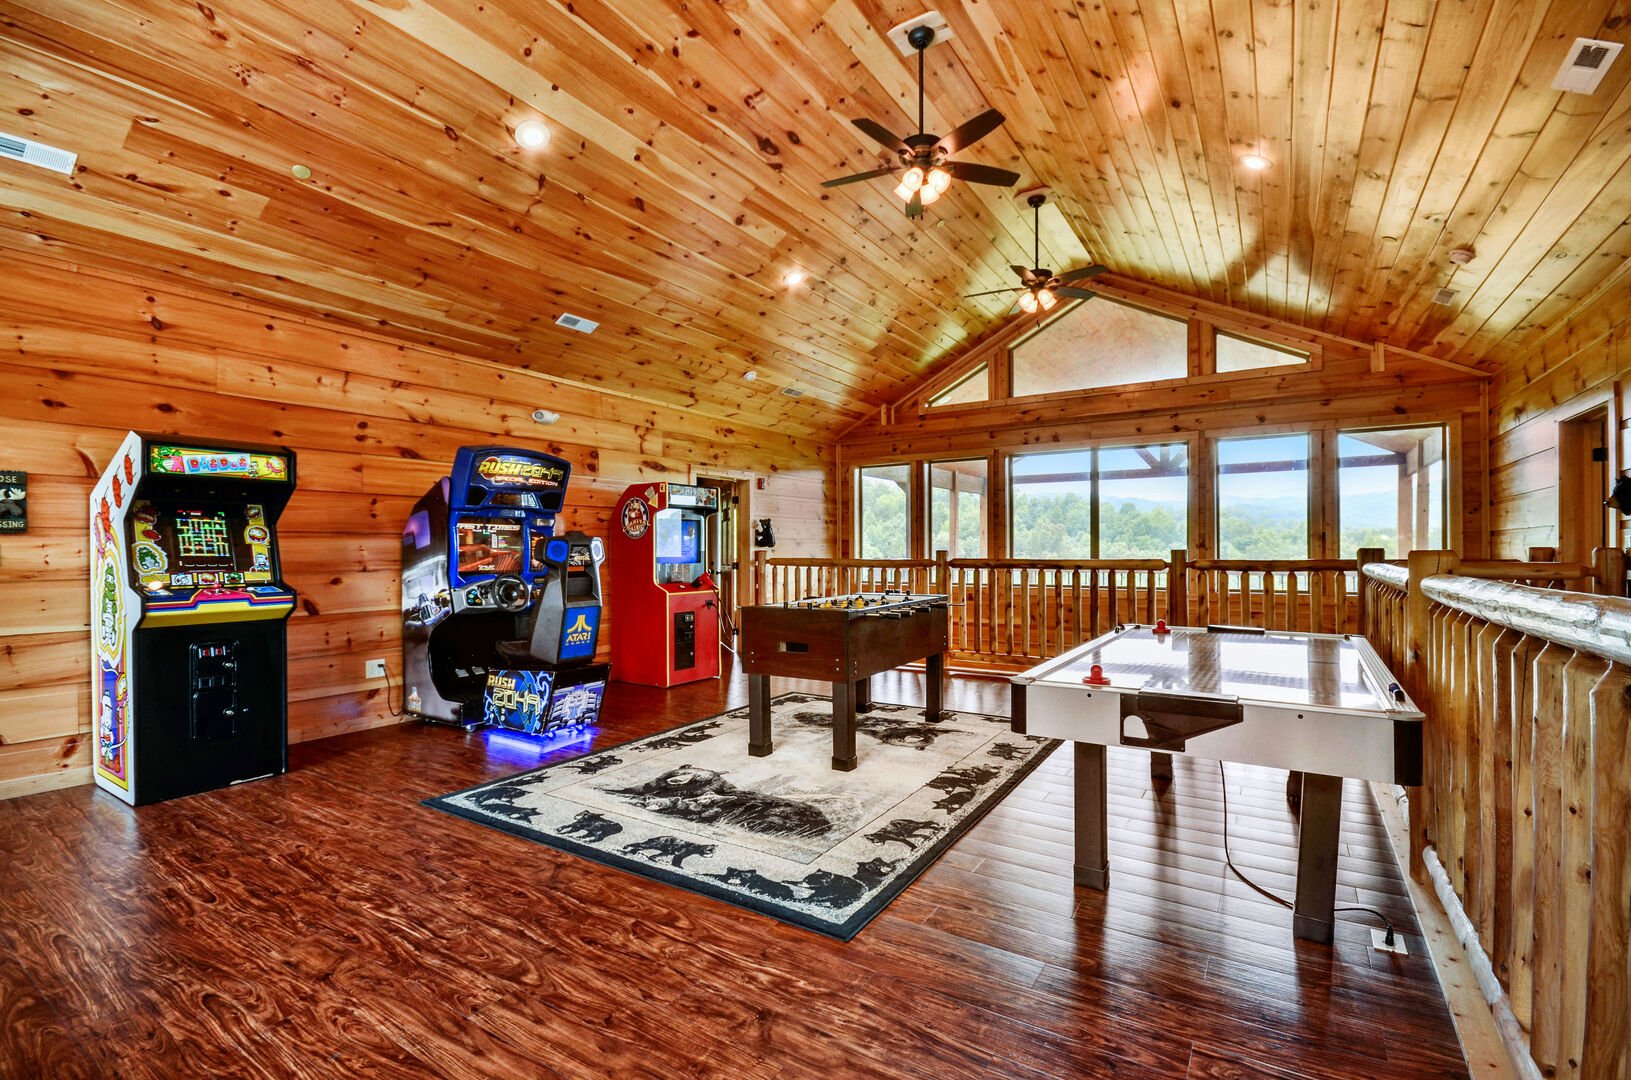 Game room with arcade cabinets and both a foosball and air hockey table on the upper floor of this Vacation rental near Gatlinburg TN.